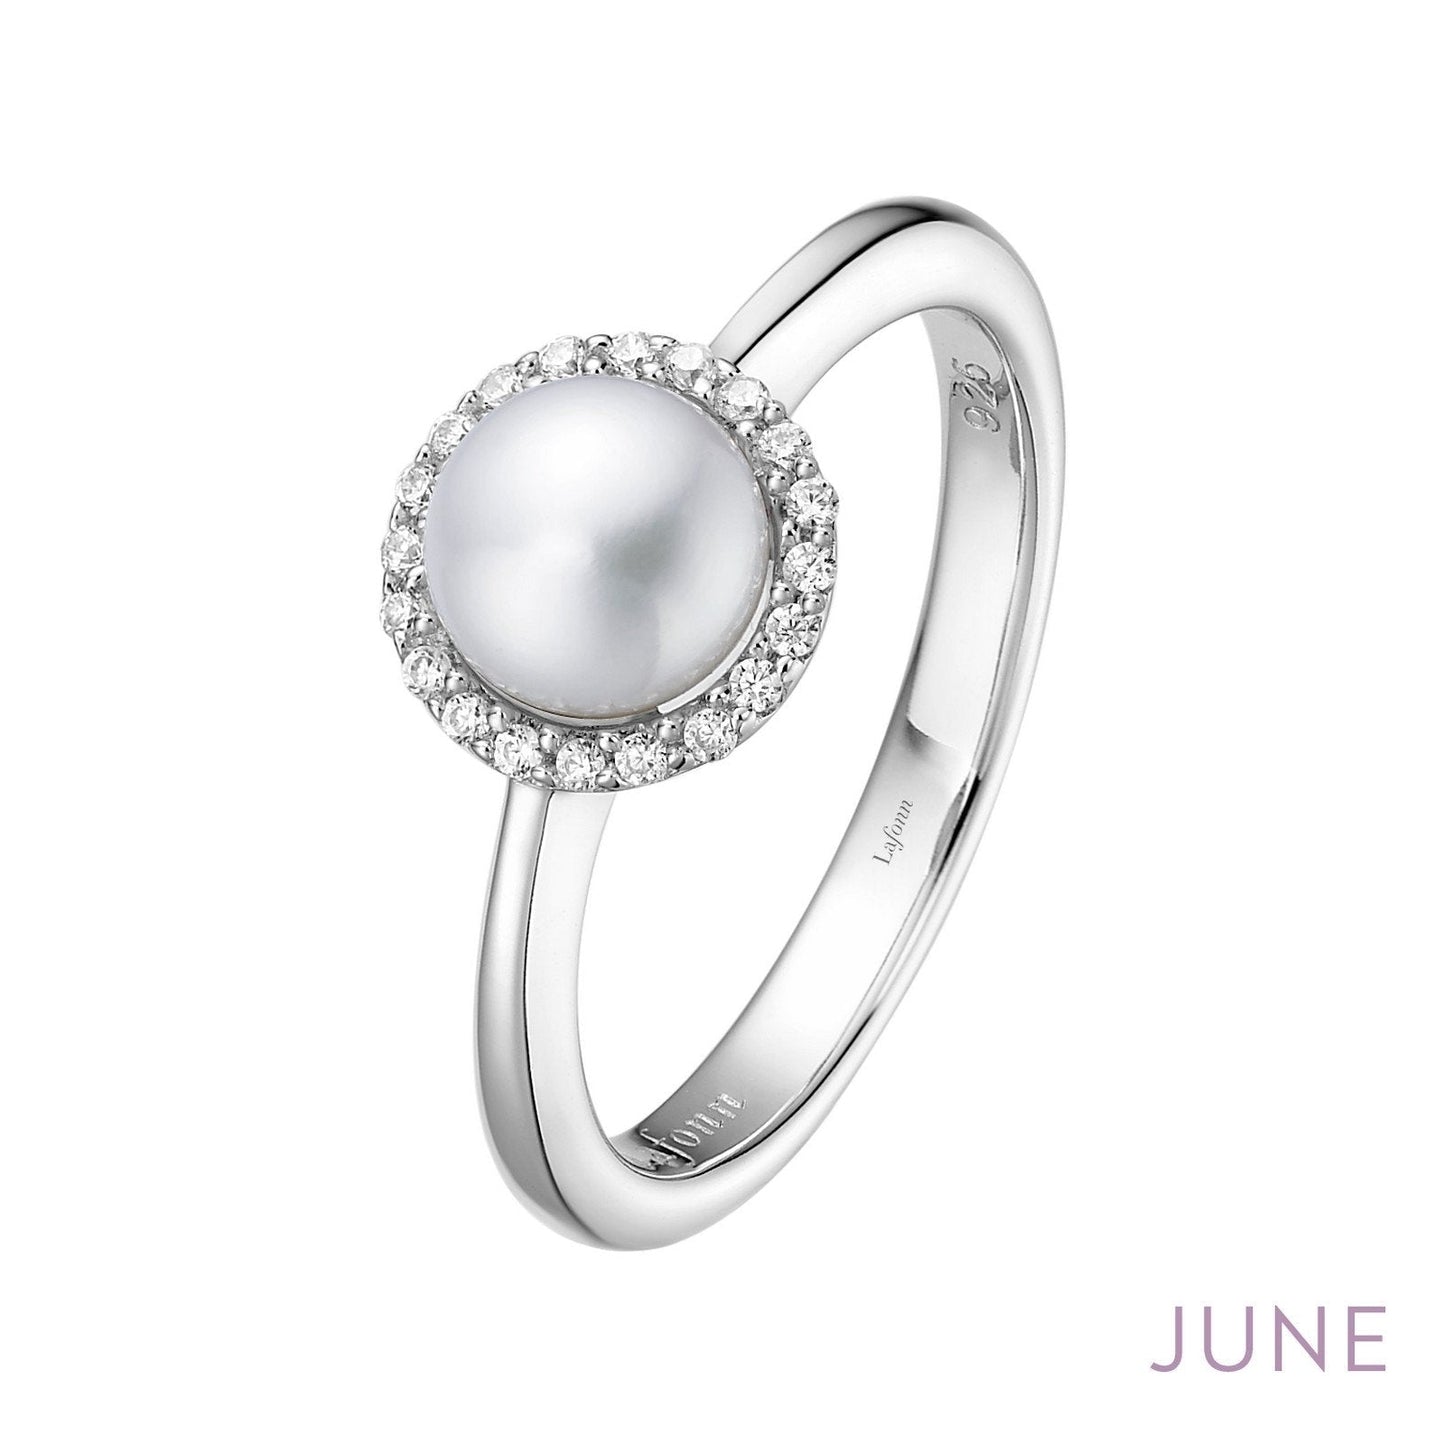 Lafonn June Birthstone Ring JUNE RINGS Size 8 Platinum Cultured Freshwater Pearl: 6mm.   Lassaire simulated diamonds: 0.20 cts. CTS 